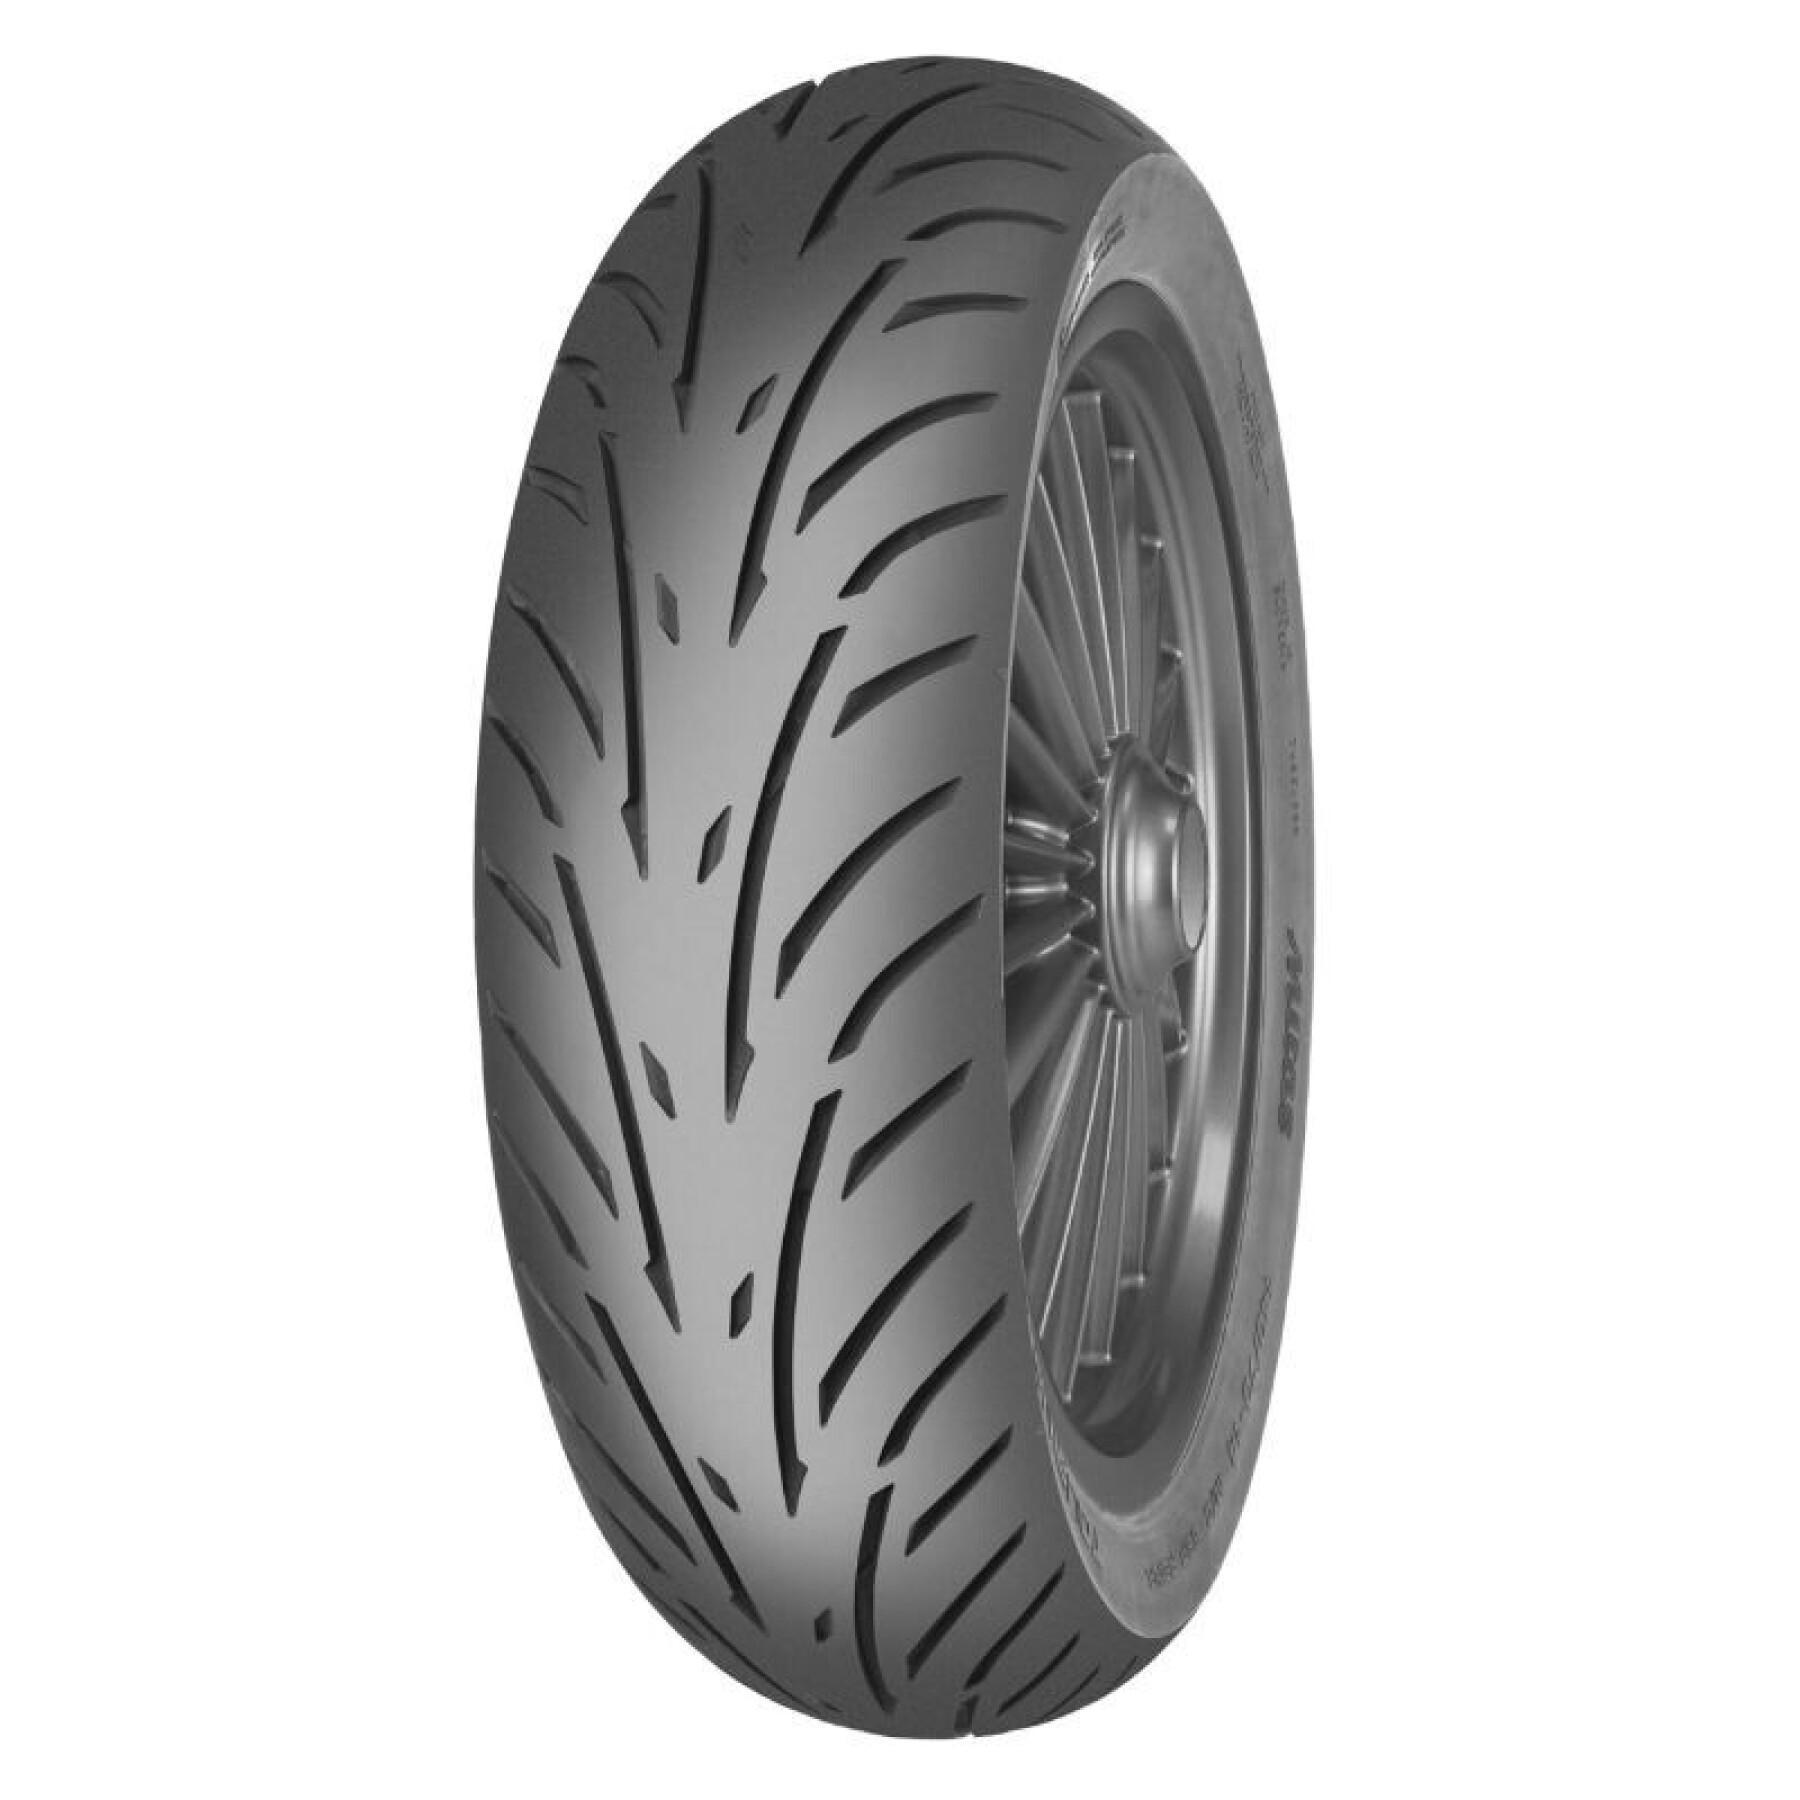 Scooter front/rear tire Mitas 80-80-14 Touring Force-Sc TL 53L Reinf